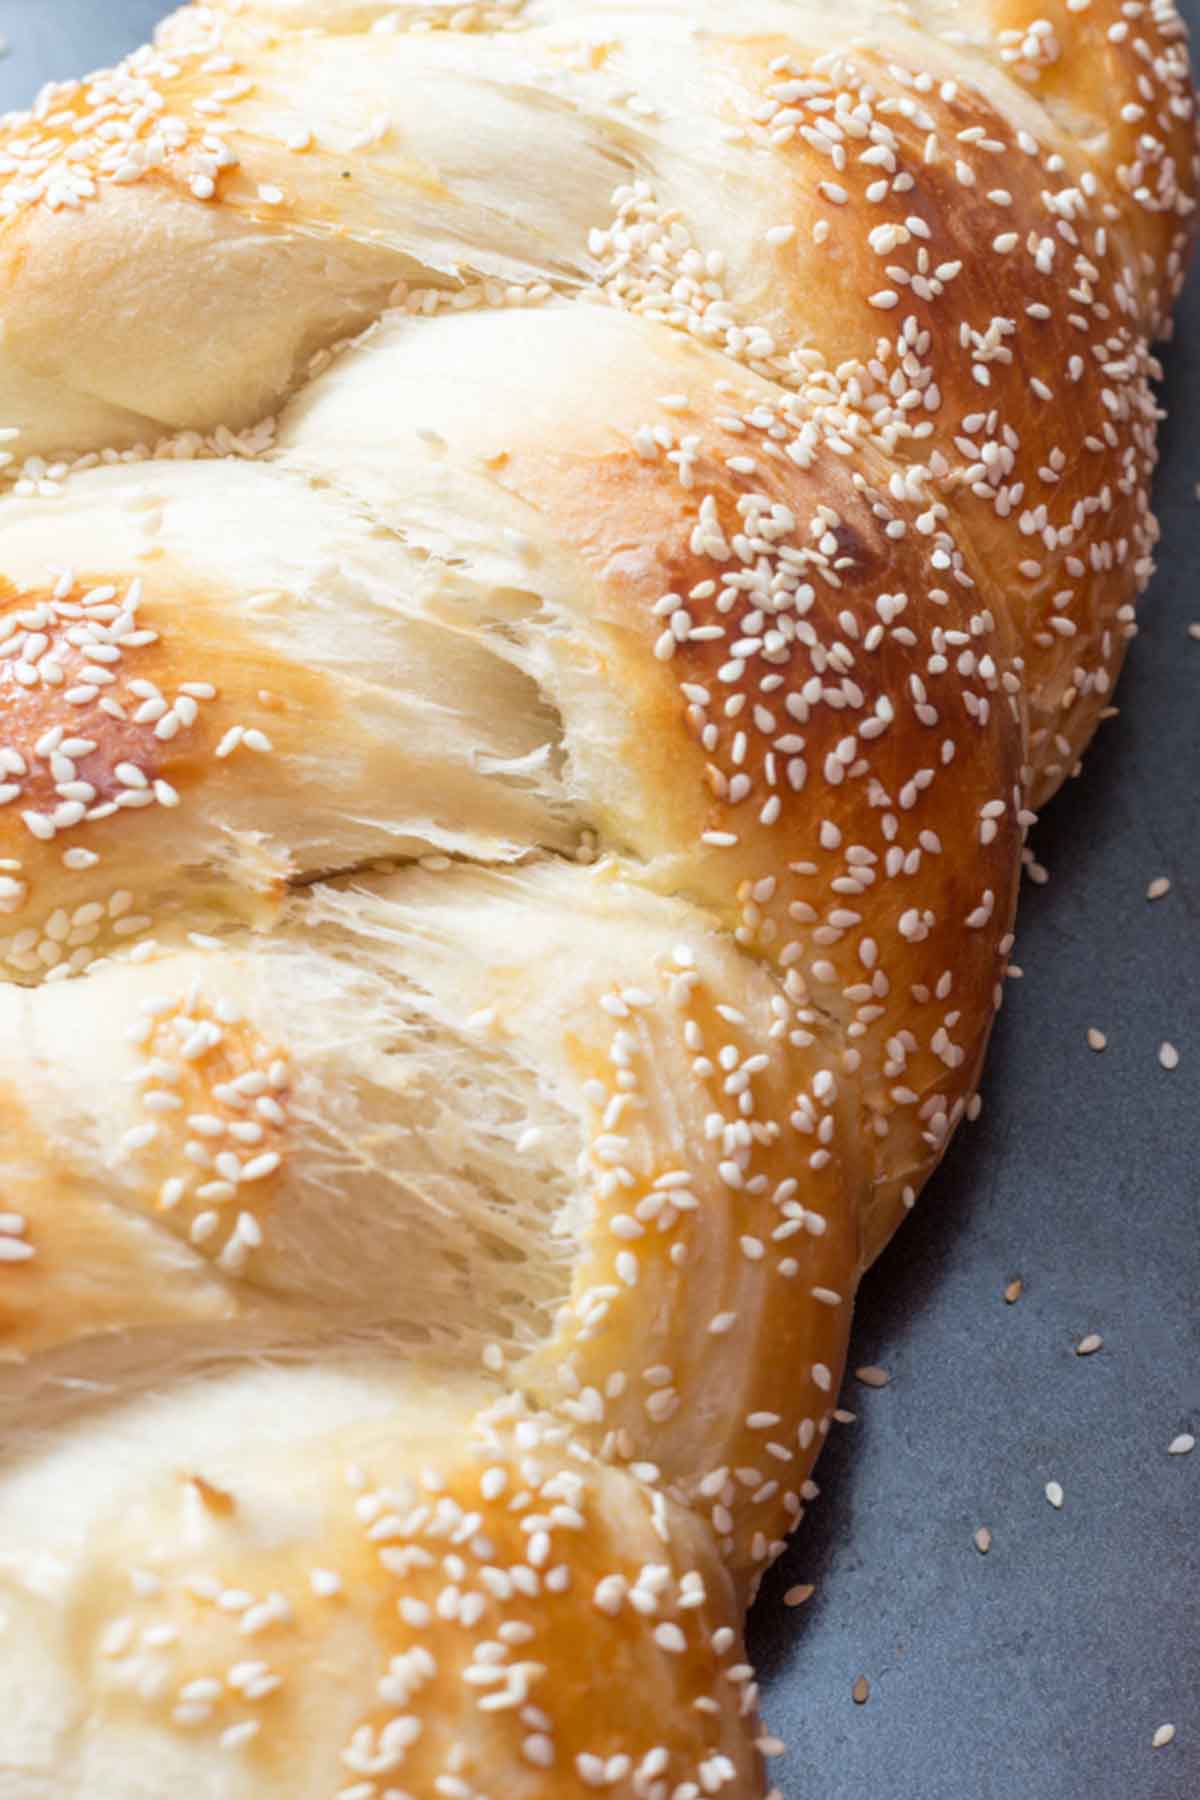 braided challah bread with sesame seeds